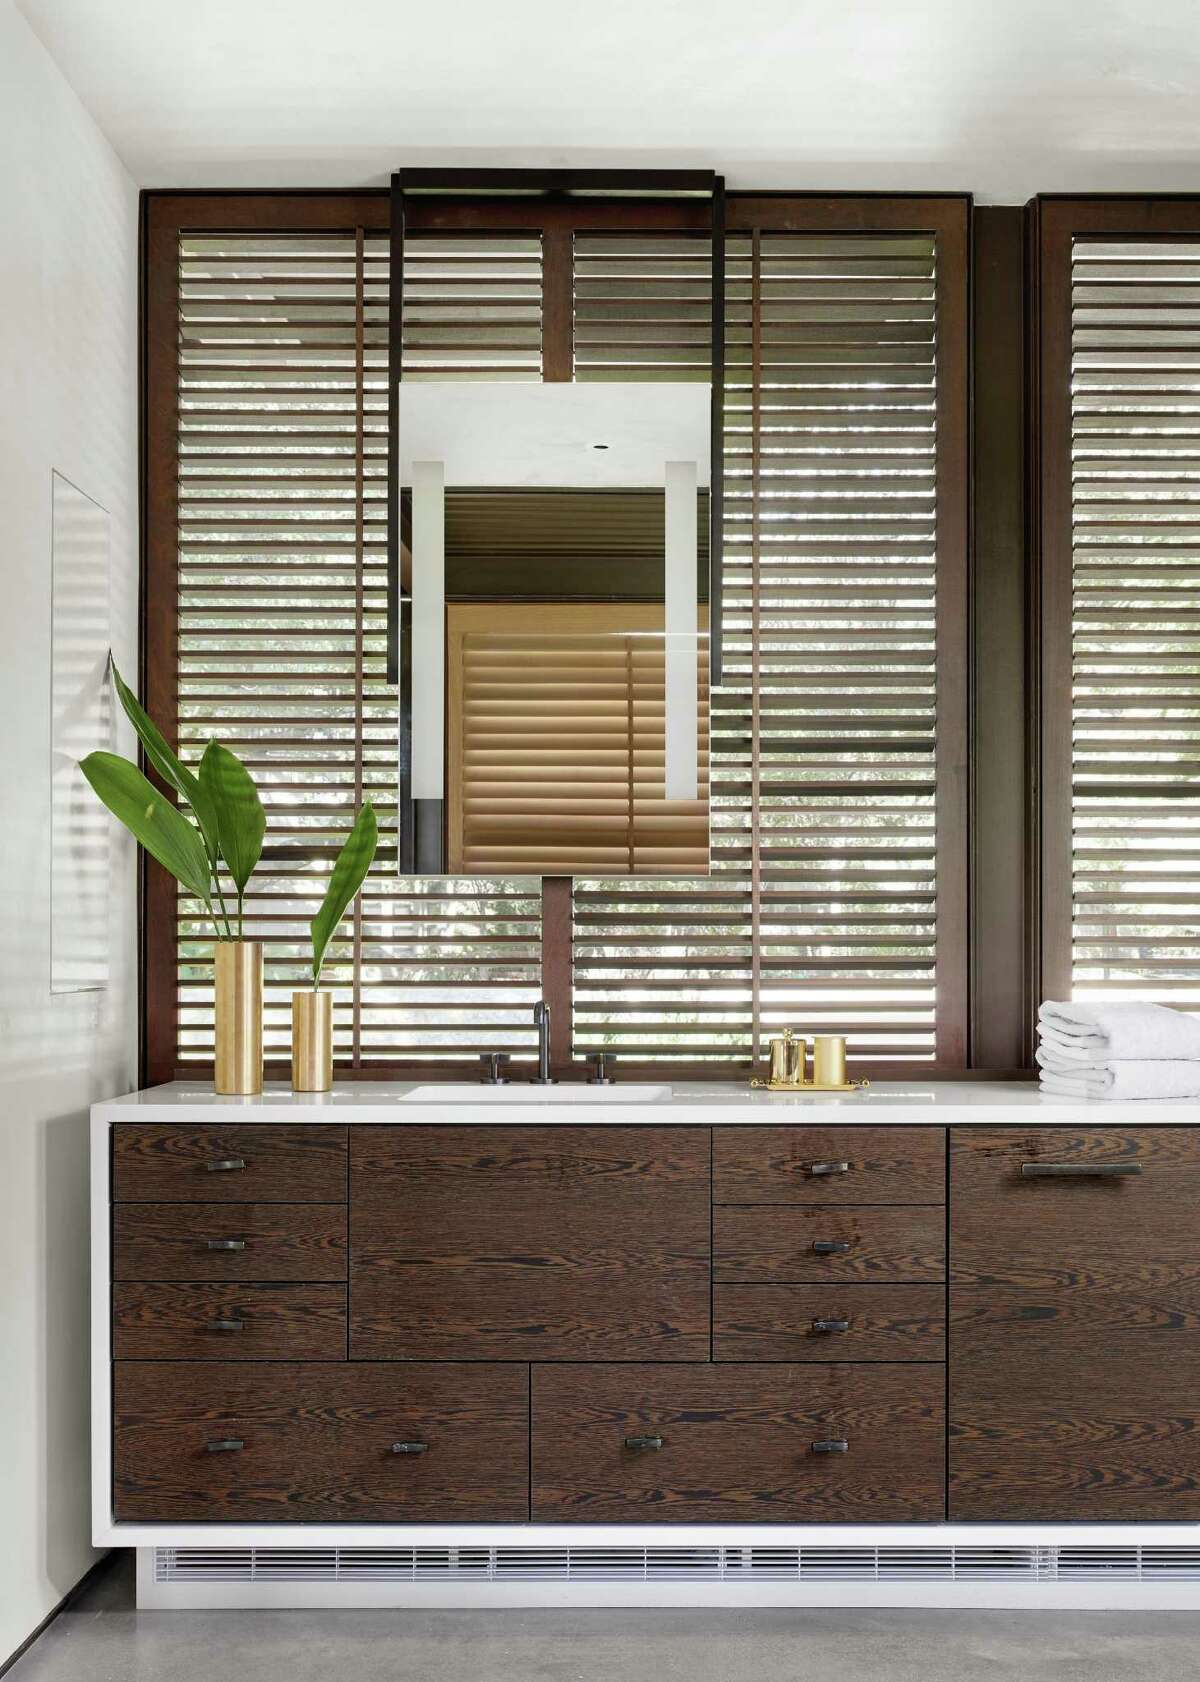 Wood has become a popular, if, perhaps, unintuitive, material sometimes used in master bathrooms. Properly sealed and maintained, woods such as white oak and mesquite not only look luxurious, but they?’ll also be able to withstand the rigors (and humidity) of a master bath for many years.